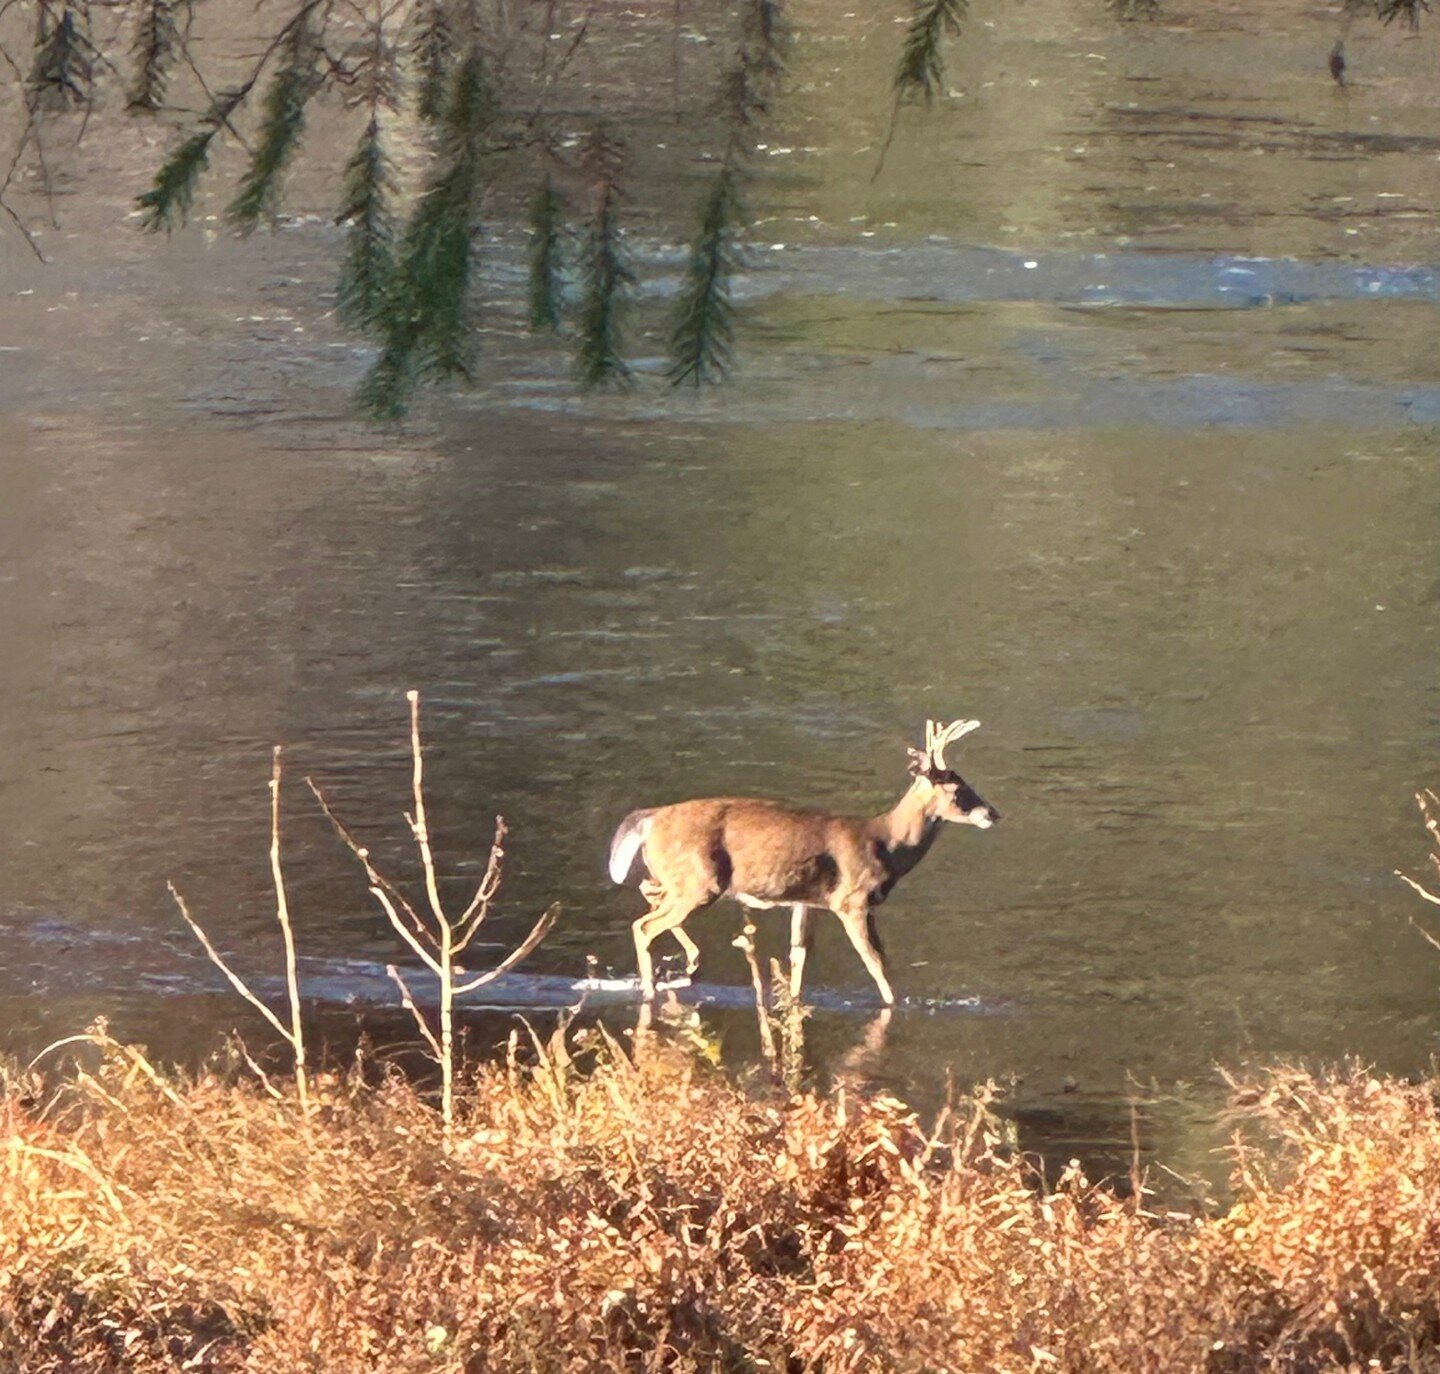 Oh deer, is it almost 2024 already?⁠
.⁠
.⁠
.⁠
⁠Powered by The Freelance Bee, DM for business inquiries.⁠
⁠
#missionpossibleny #narrowsburgny #narrowsburg #nystateofmind #catskillsny #catskillsairbnbny #catskillmountains #delawareriver #airbnbny #cats